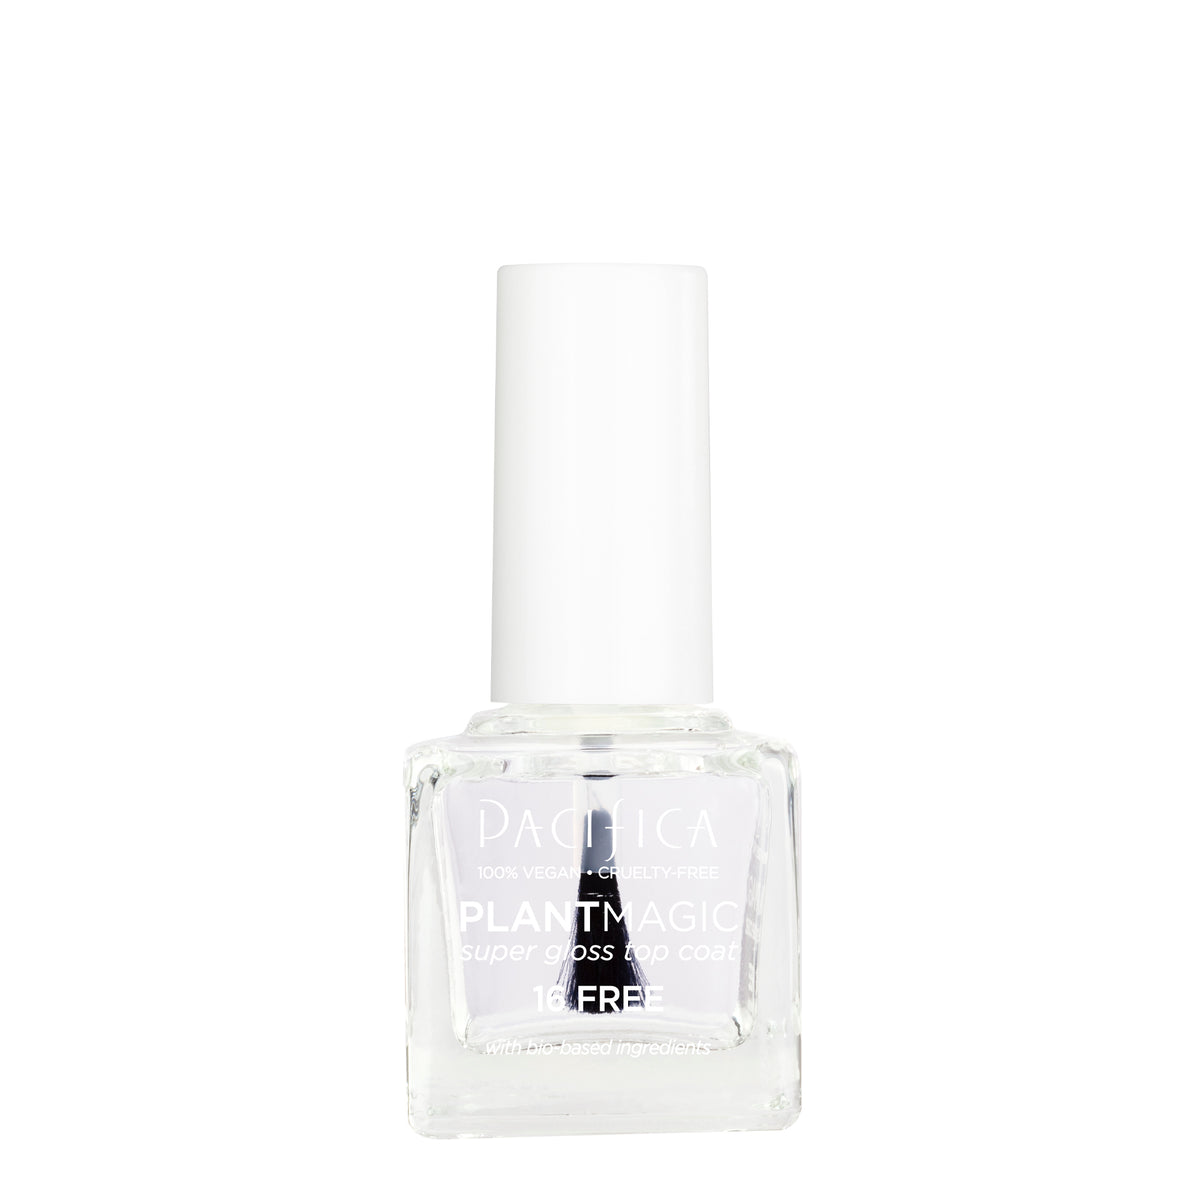 Top Coat and Base Coat- Are They Essential?